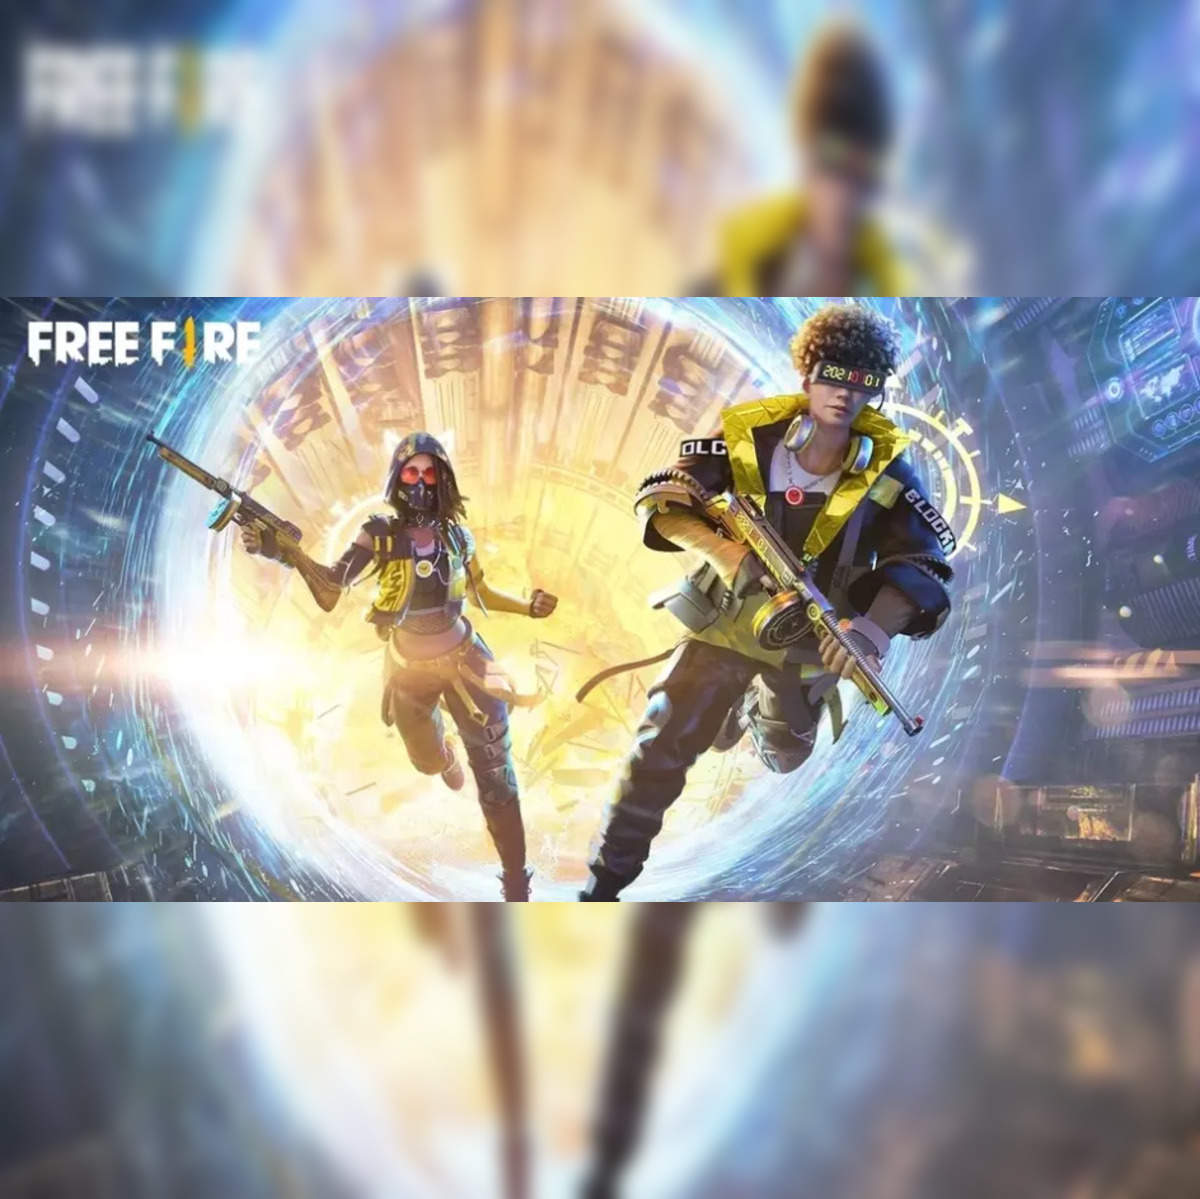 Garena Free Fire added a new photo. - Garena Free Fire